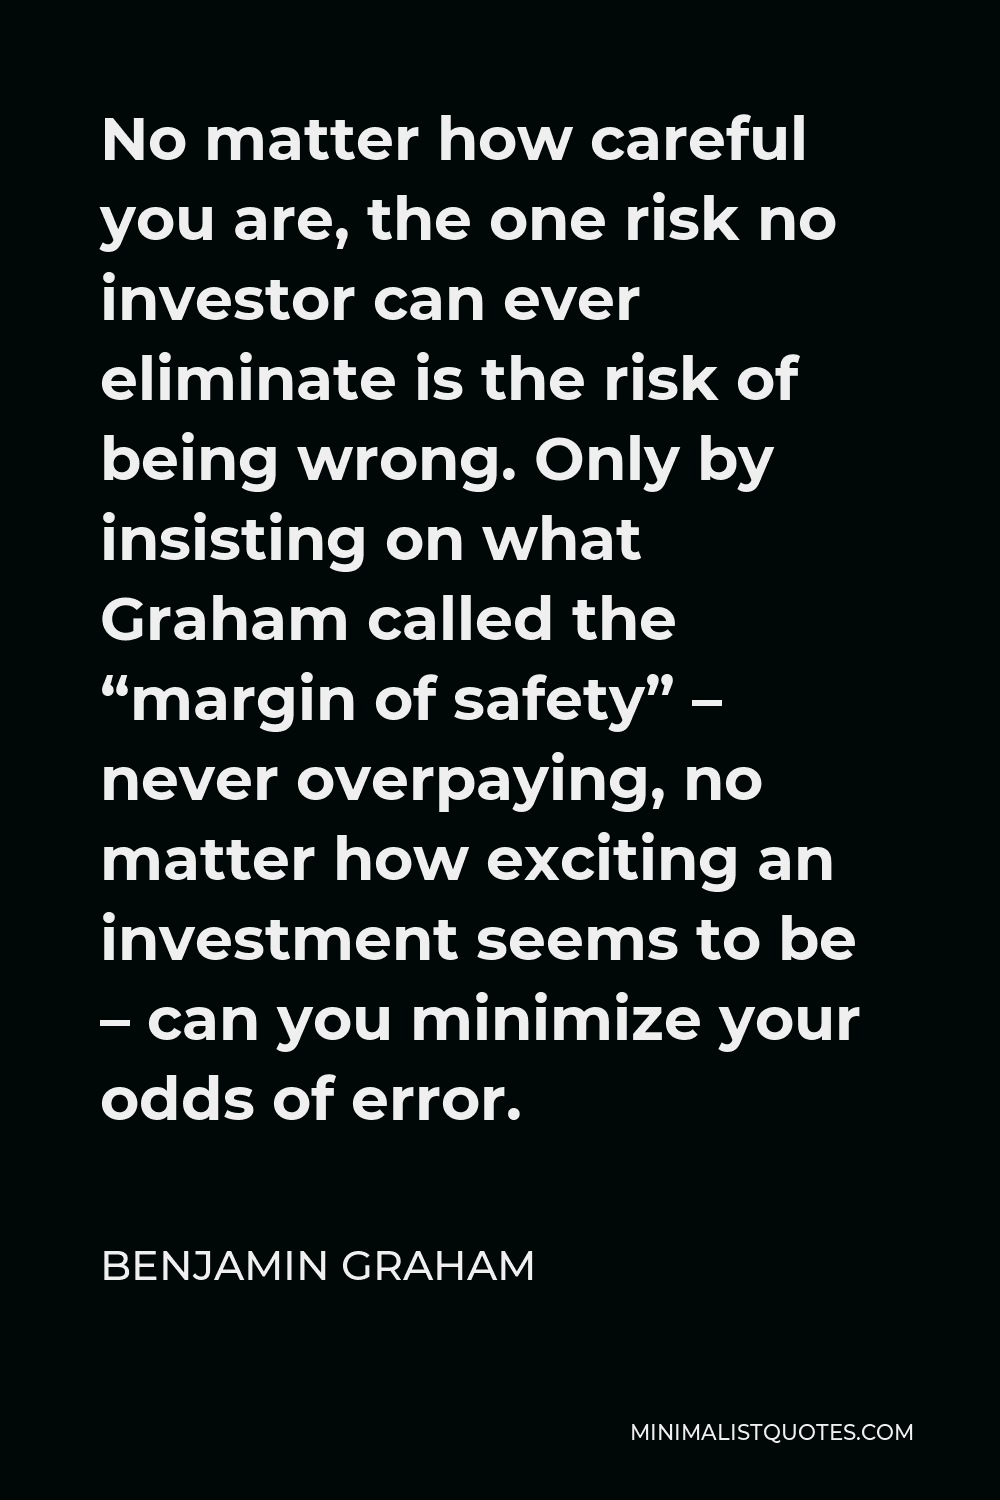 Benjamin Graham Quote - No matter how careful you are, the one risk no investor can ever eliminate is the risk of being wrong. Only by insisting on what Graham called the “margin of safety” – never overpaying, no matter how exciting an investment seems to be – can you minimize your odds of error.